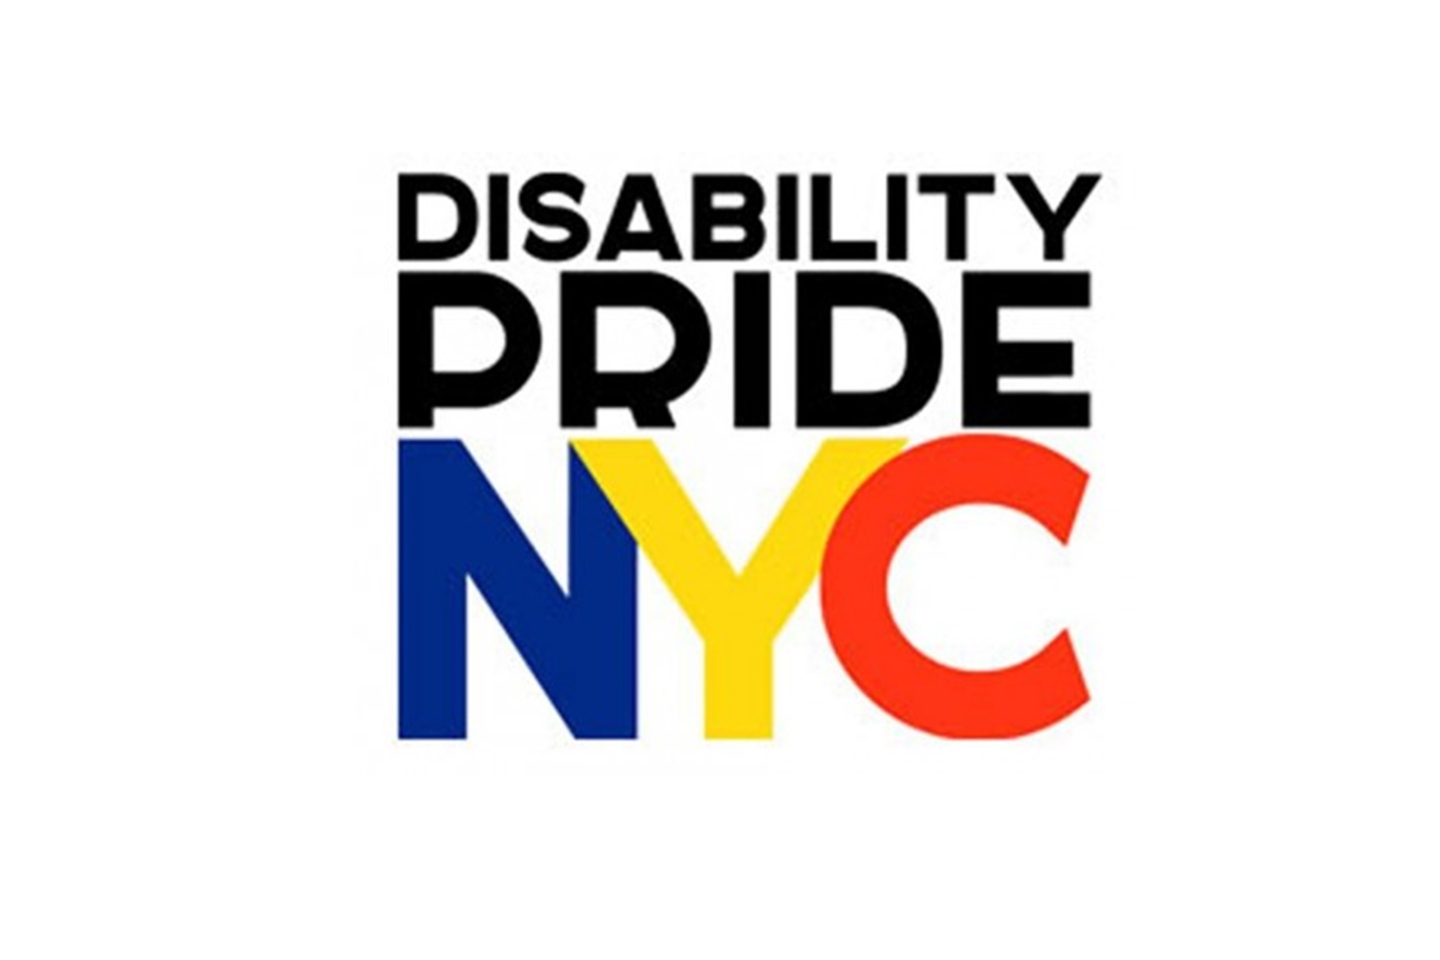 Disability Pride Parade NYC logo. Letters NYC are in blue, yellow and red.